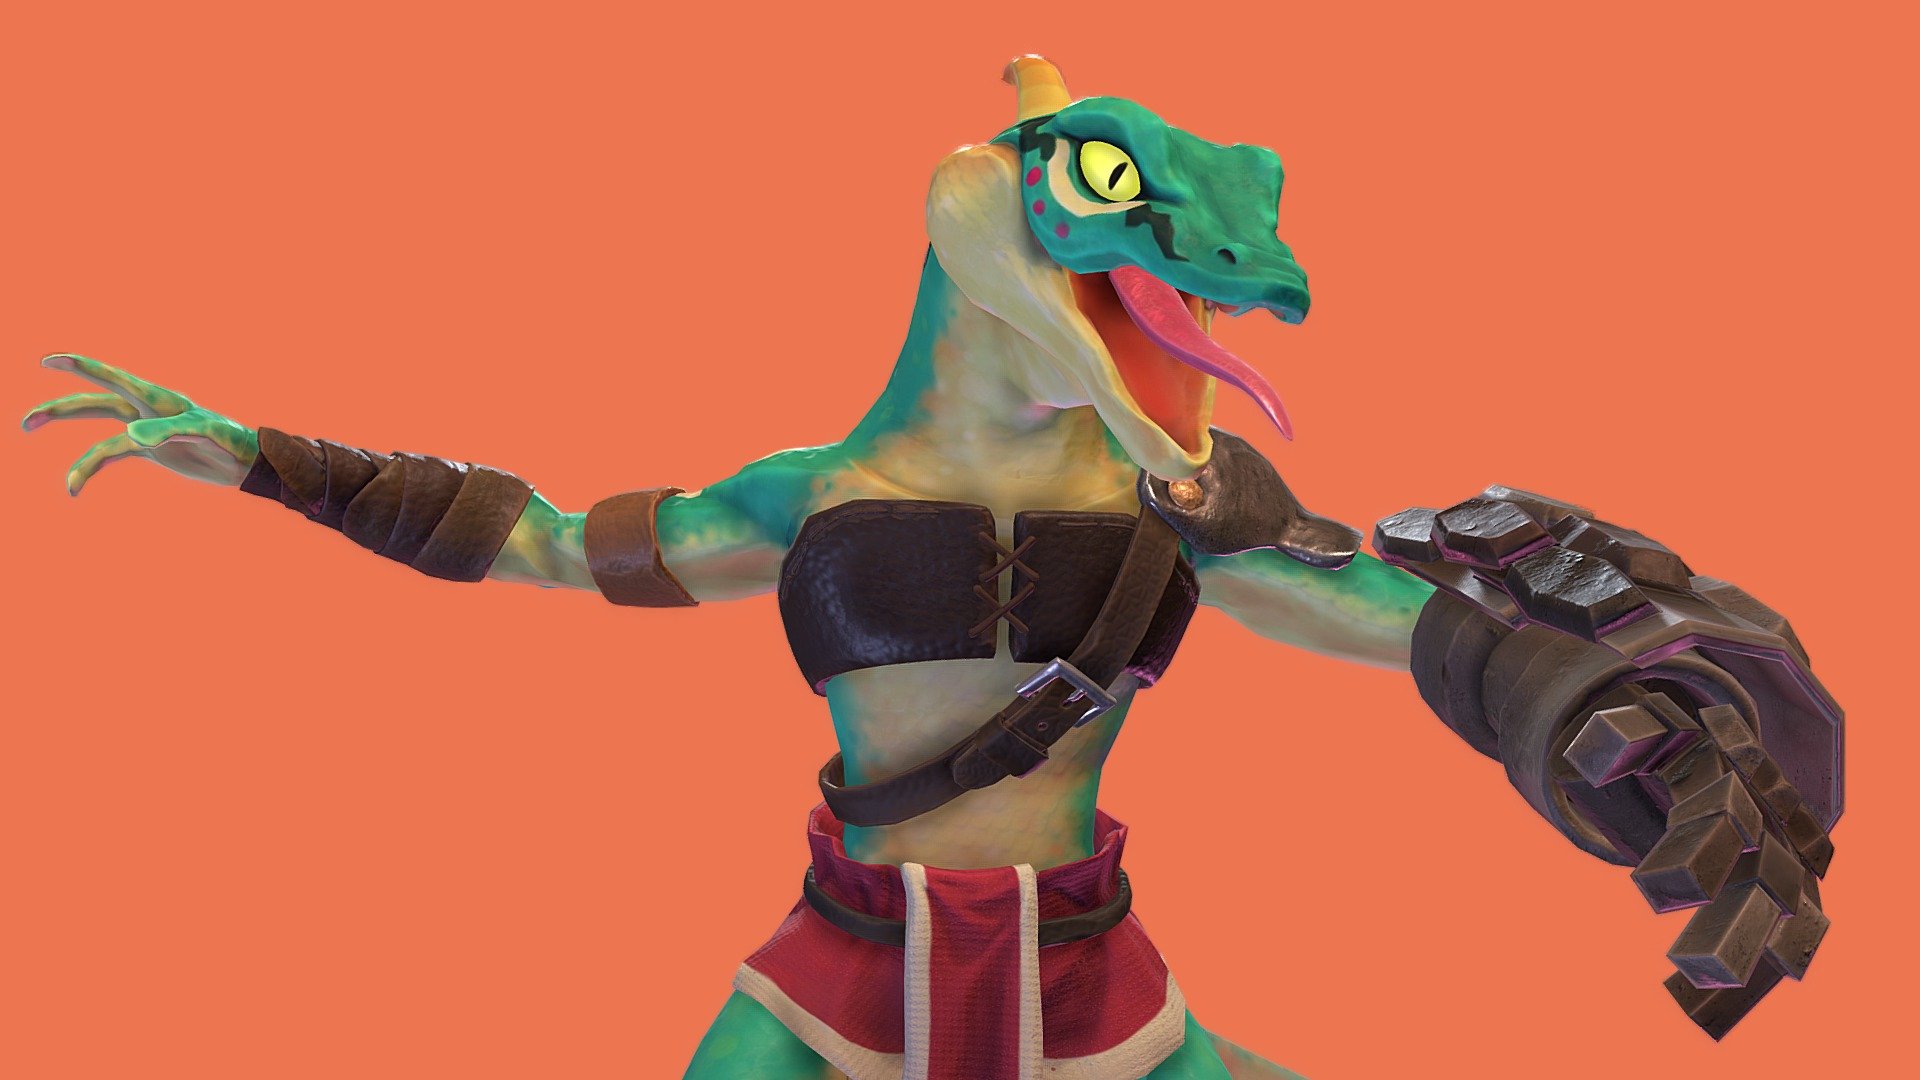 This is my final assignment for my Stylized minor at DAE Howest. For this assignment we had to make a game and/or animation ready model based on a chosen concpet. I chose the original Lizalfos design for the Legend of Zelda: Skyward Sword by Nintendo.

The pipeline involved sculpting and polypainting in ZBrush, manually retopo in 3dsmax, bake and add materials in Substance and finally run again through ZBrush for posing.

I'm open for feedback, especially regarding presentation (pose, lighting, ect) so feel free to leave a comment :) - Lizalfos Skyward Sword - Stylized Minor Final - 3D model by Catharina_Broes (@Catharina_B) 3d model